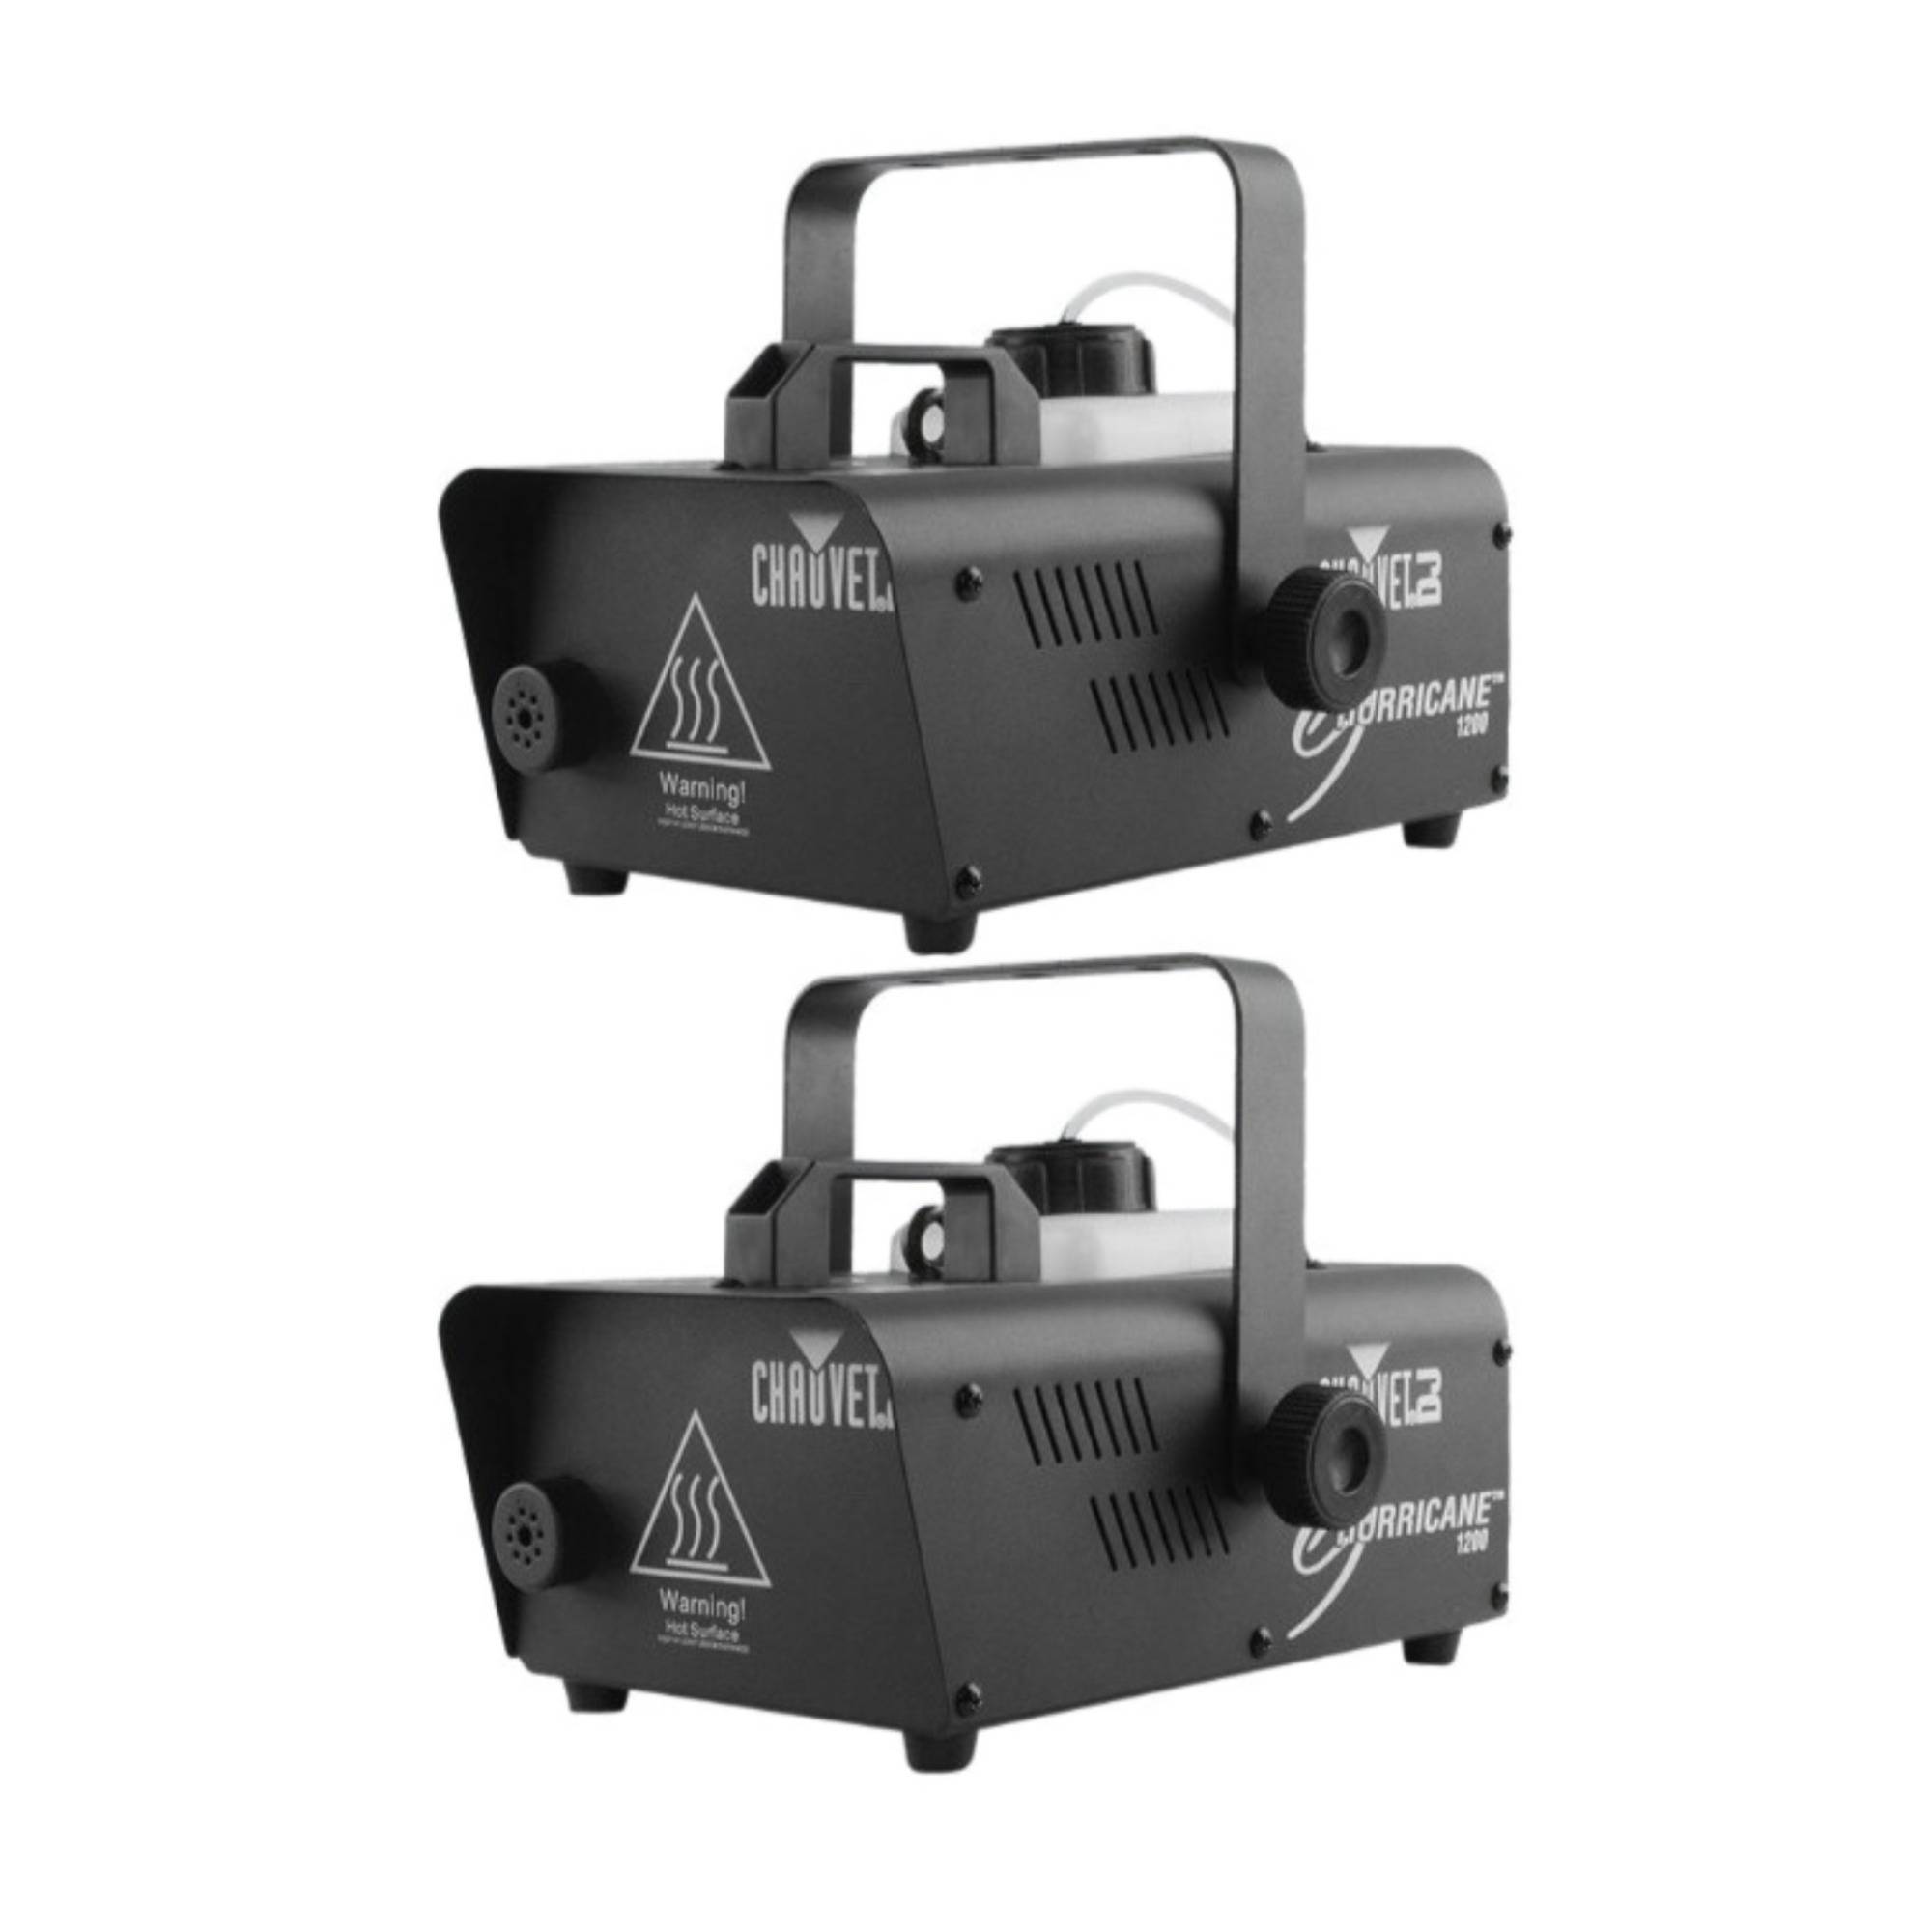 Chauvet DJ H1200 Compact and Lightweight Fog Machine with Timer Remote (Black, 2-Pack)